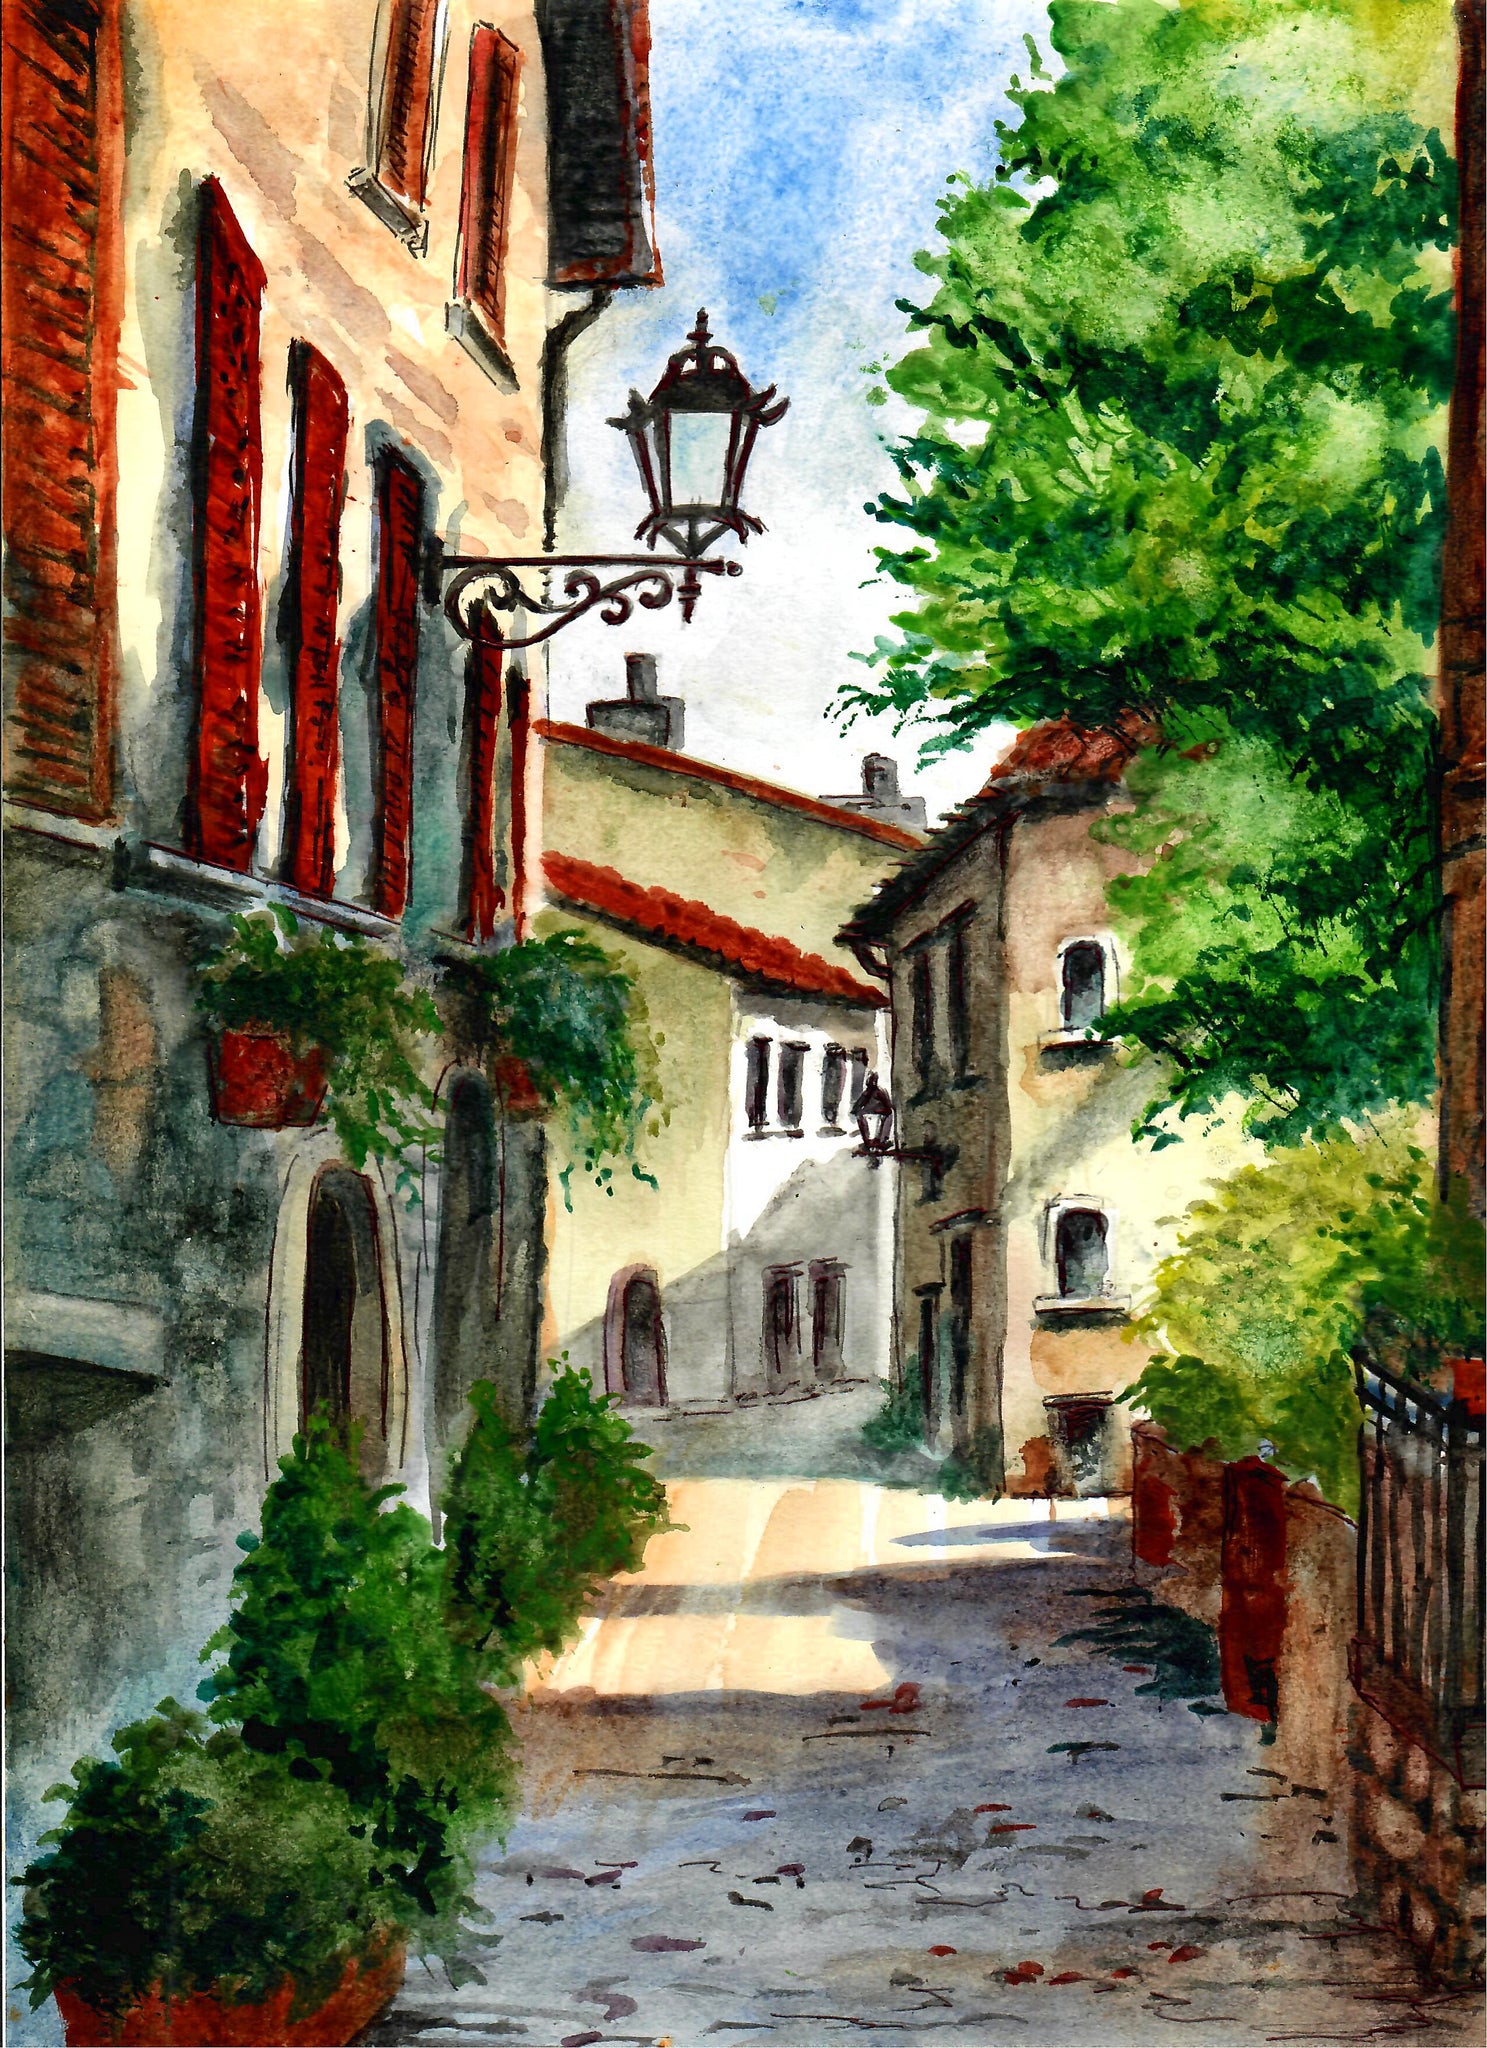 Cities - Narrow Alley In An Old Town, Paved Street, Landscape Art, City Art, Old Building